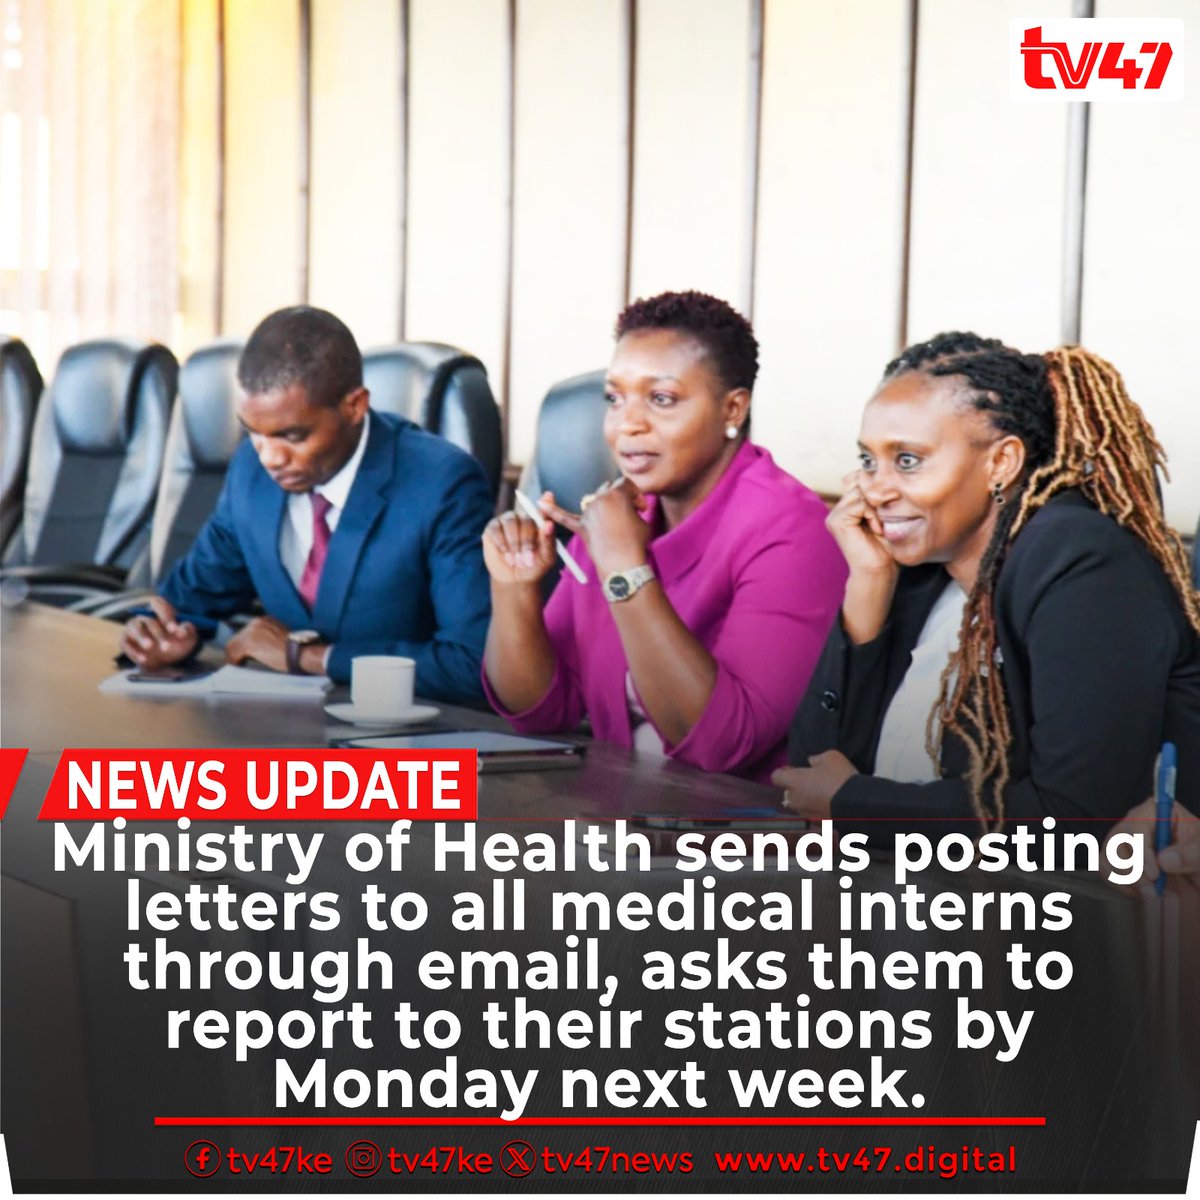 They know the value of interns, they know their importance in these public hospitals, and they know whatever used to be paid to them is worth their work. @MOH_Kenya have you tried WhatsApp?